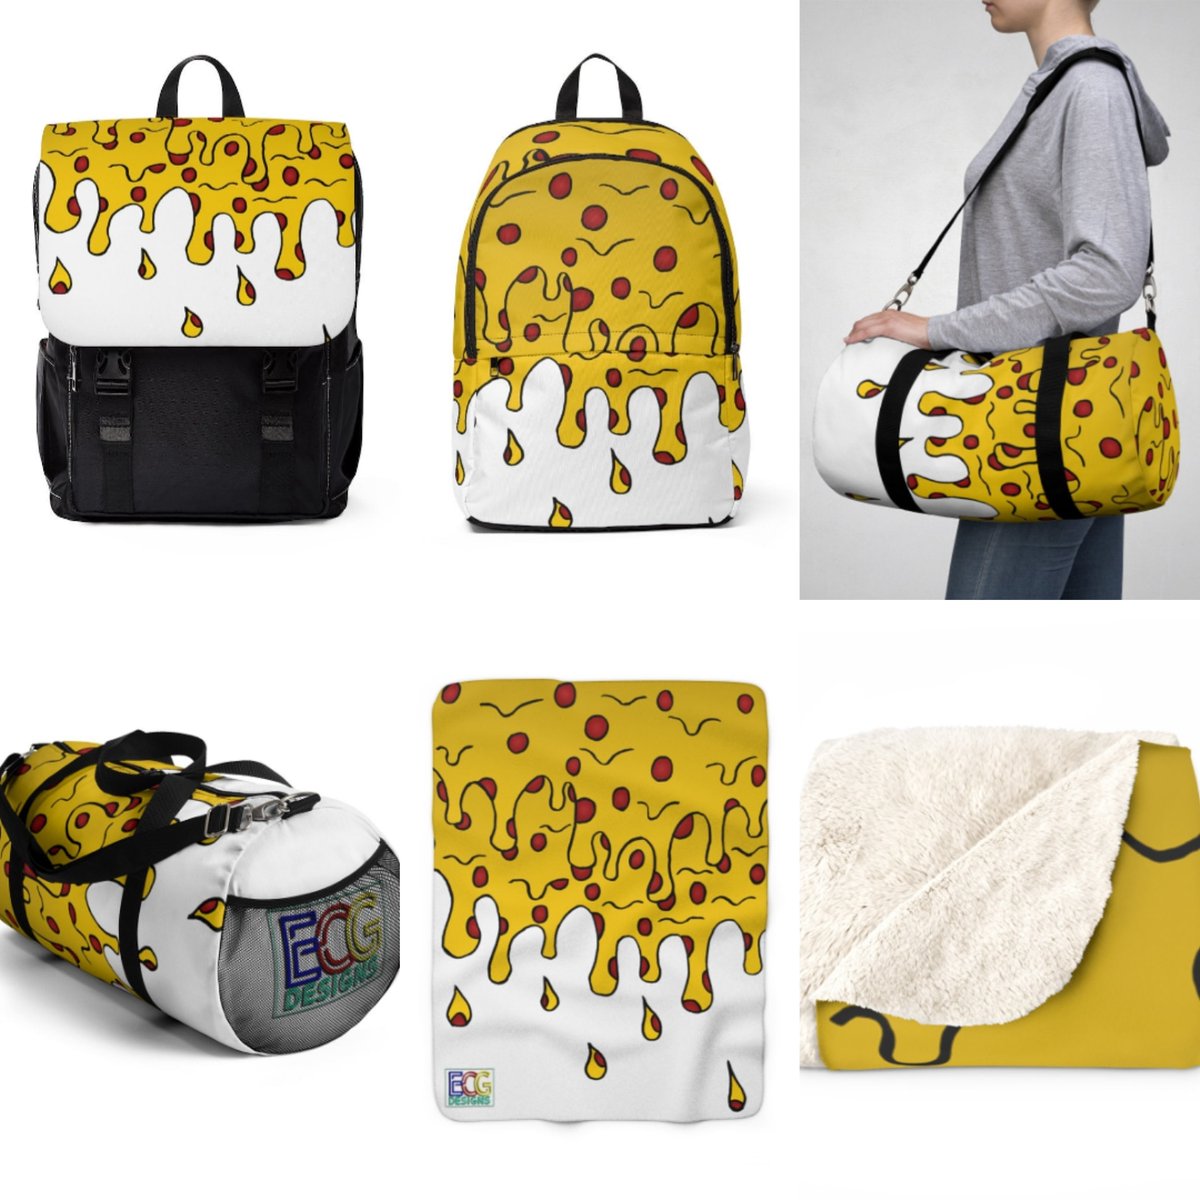 Our cheesy pizza design on backpacks, a blanket and a duffle bag!

#ecgdesigns #cheesy #pizza #cheesypizza #cheese #pepperoni #pepperonipizza #design #backpack #blanket #dufflebag #sherpablanket #fleece #sherpafleece #sherpafleeceblanket